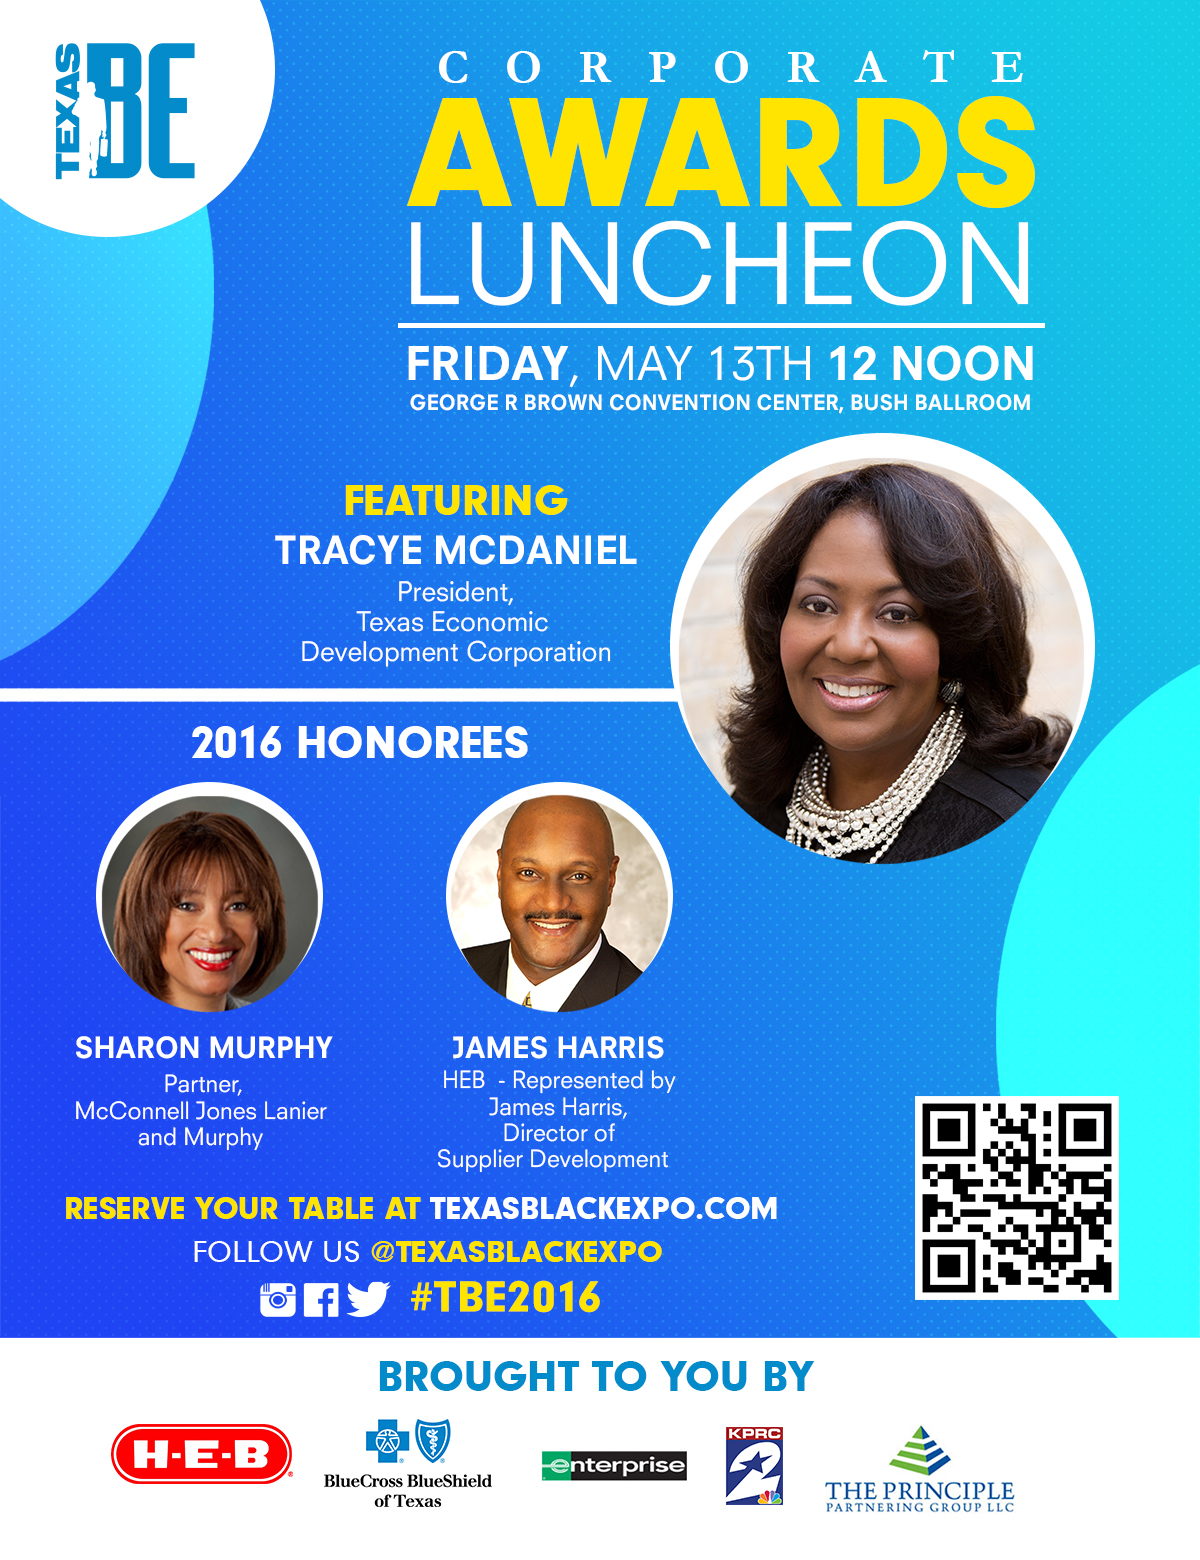 tbe-2016-corporate-awards-luncheon-3-22